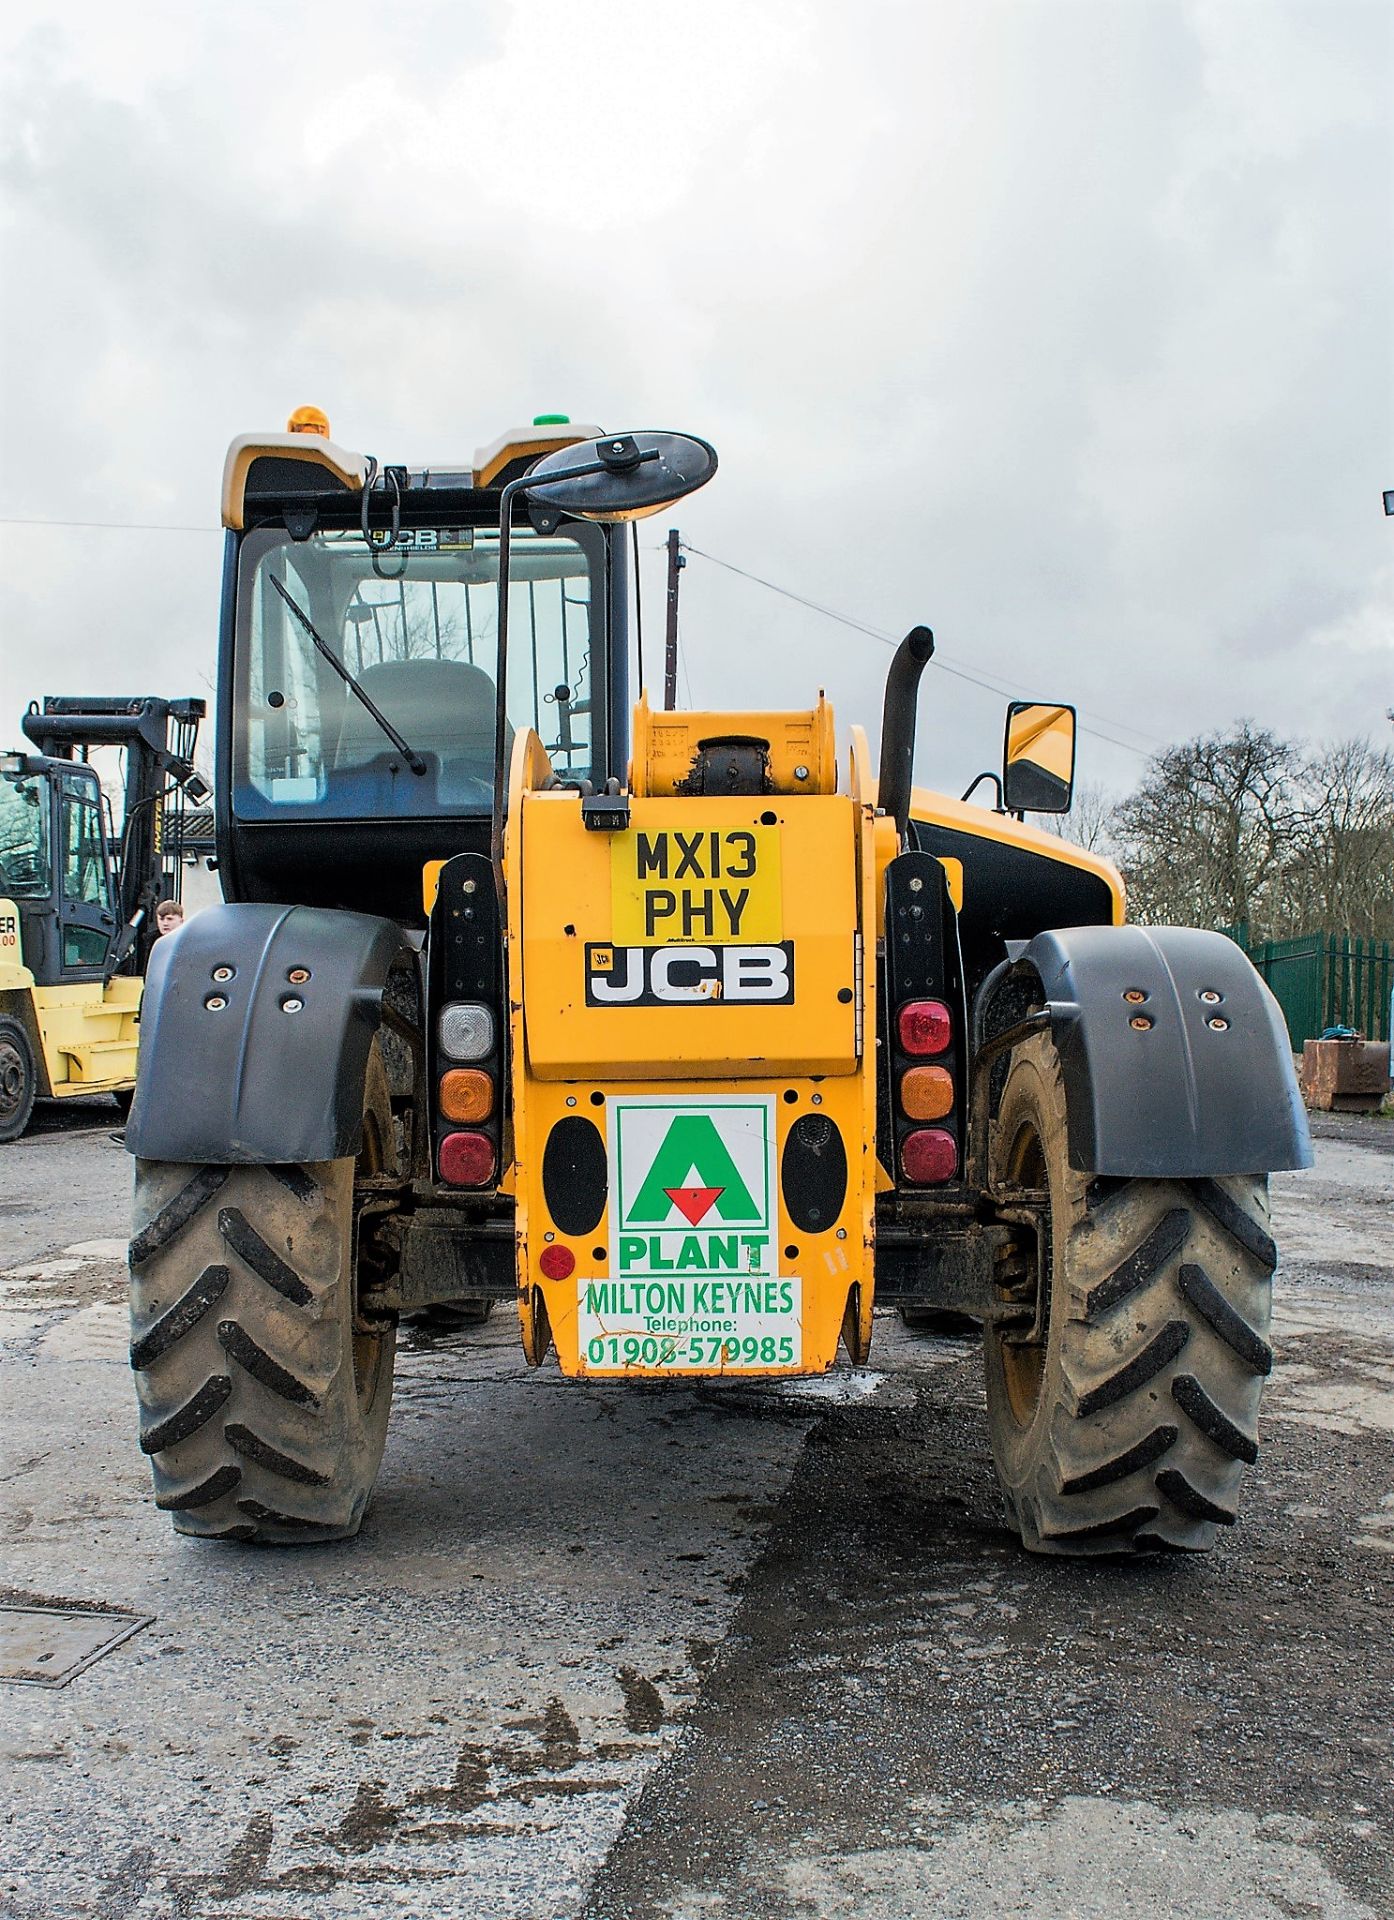 JCB 531-70 7 metre telescopic handler Year: 2013 S/N: 2176575 Reg No: MX13 PHY Recorded Hours: - Image 6 of 19